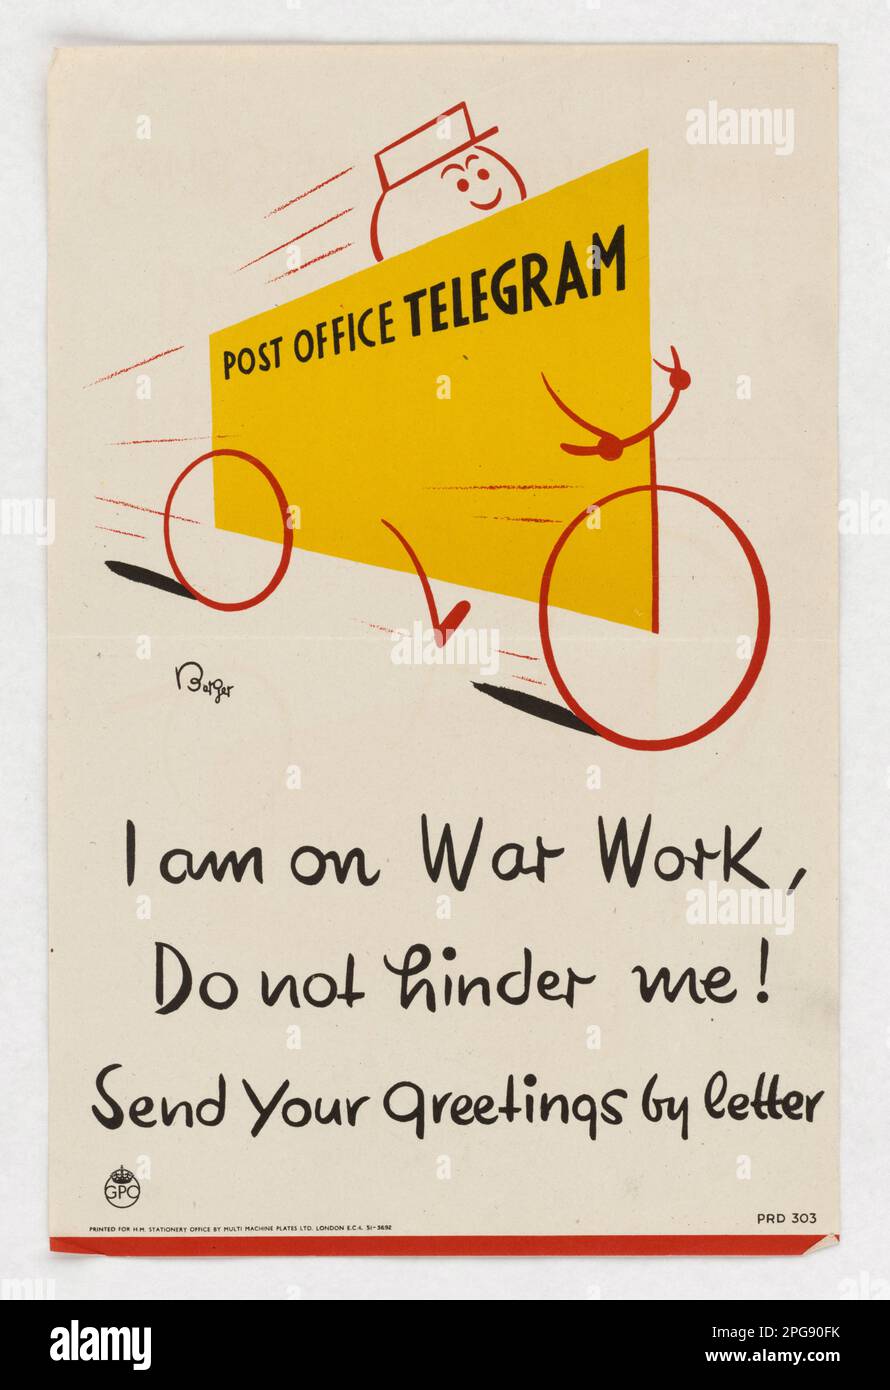 I am on War Work, Do Not Hinder Me! Send Your Greetings by Letter. Country: England Artist: Berger Printed By: Multi Machine Plates, Ltd.. 1942 - 1945.  Office for Emergency Management. Office of War Information. Domestic Operations Branch. Bureau of Special Services. 3/9/1943-9/15/1945. World War II Foreign Posters Stock Photo